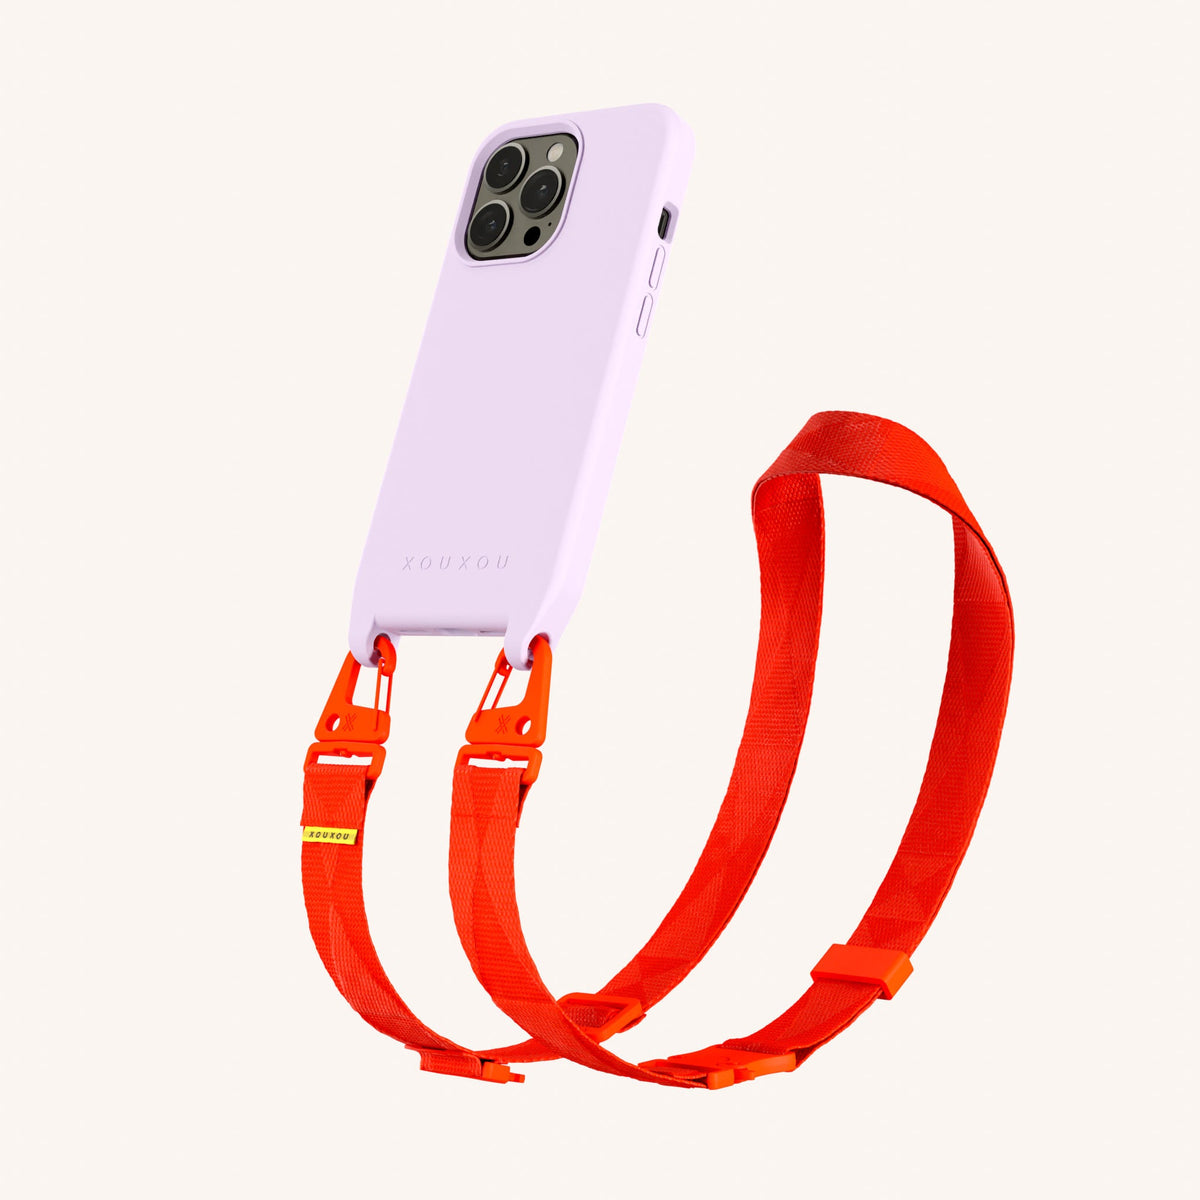 Phone Necklace with Lanyard for iPhone 13 Pro with MagSafe in Lilac + Neon Orange Perspective View | XOUXOU #phone model_iphone 13 pro